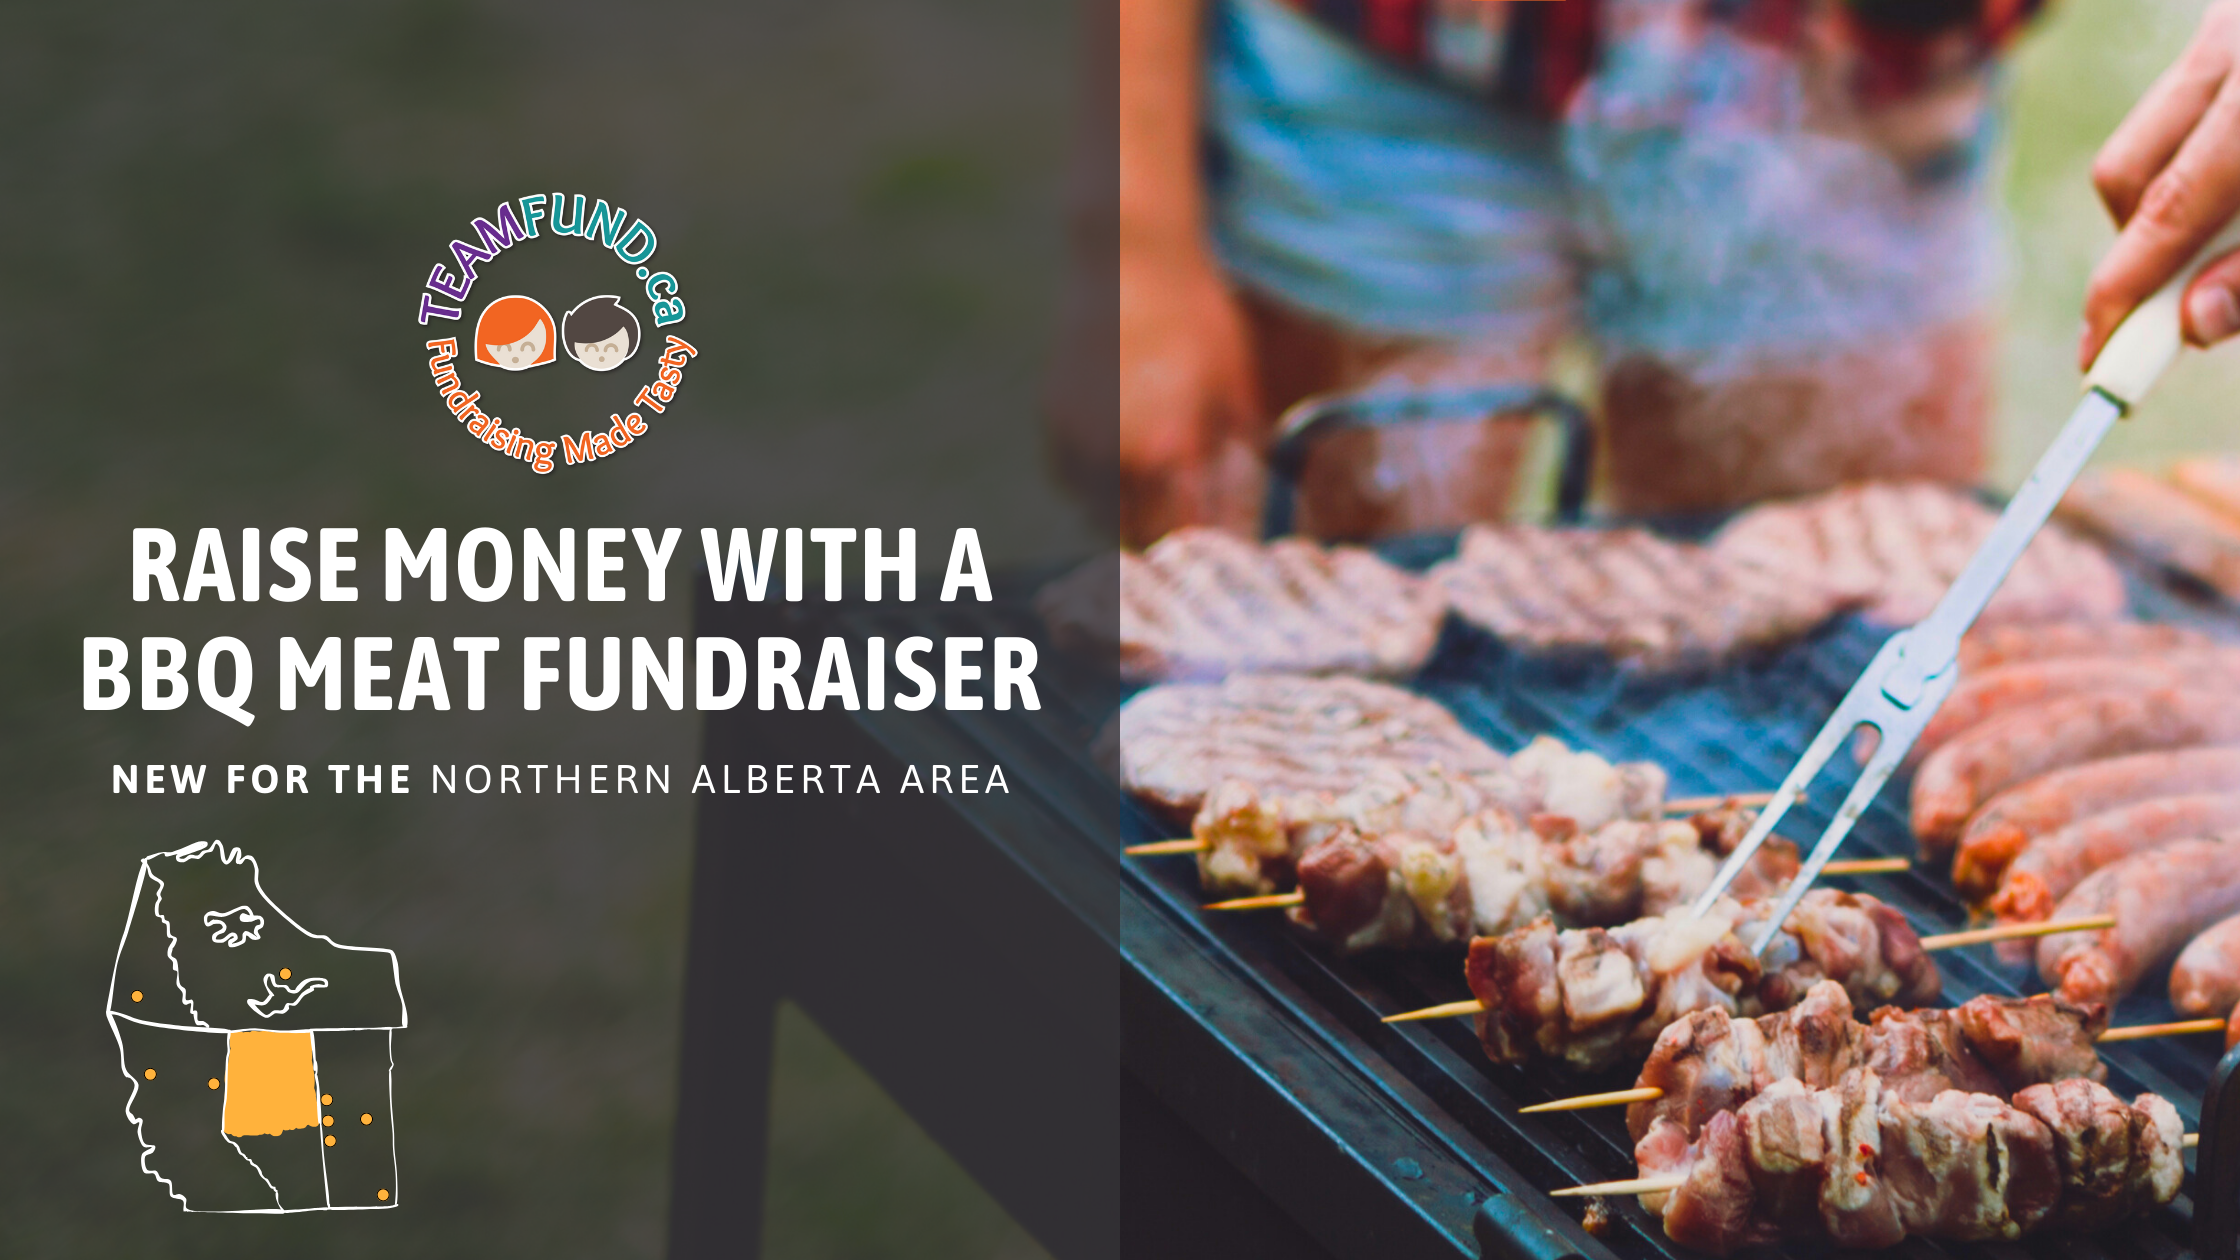 New Fundraiser: Raise Money With a BBQ Meat Fundraiser This Spring & Summer